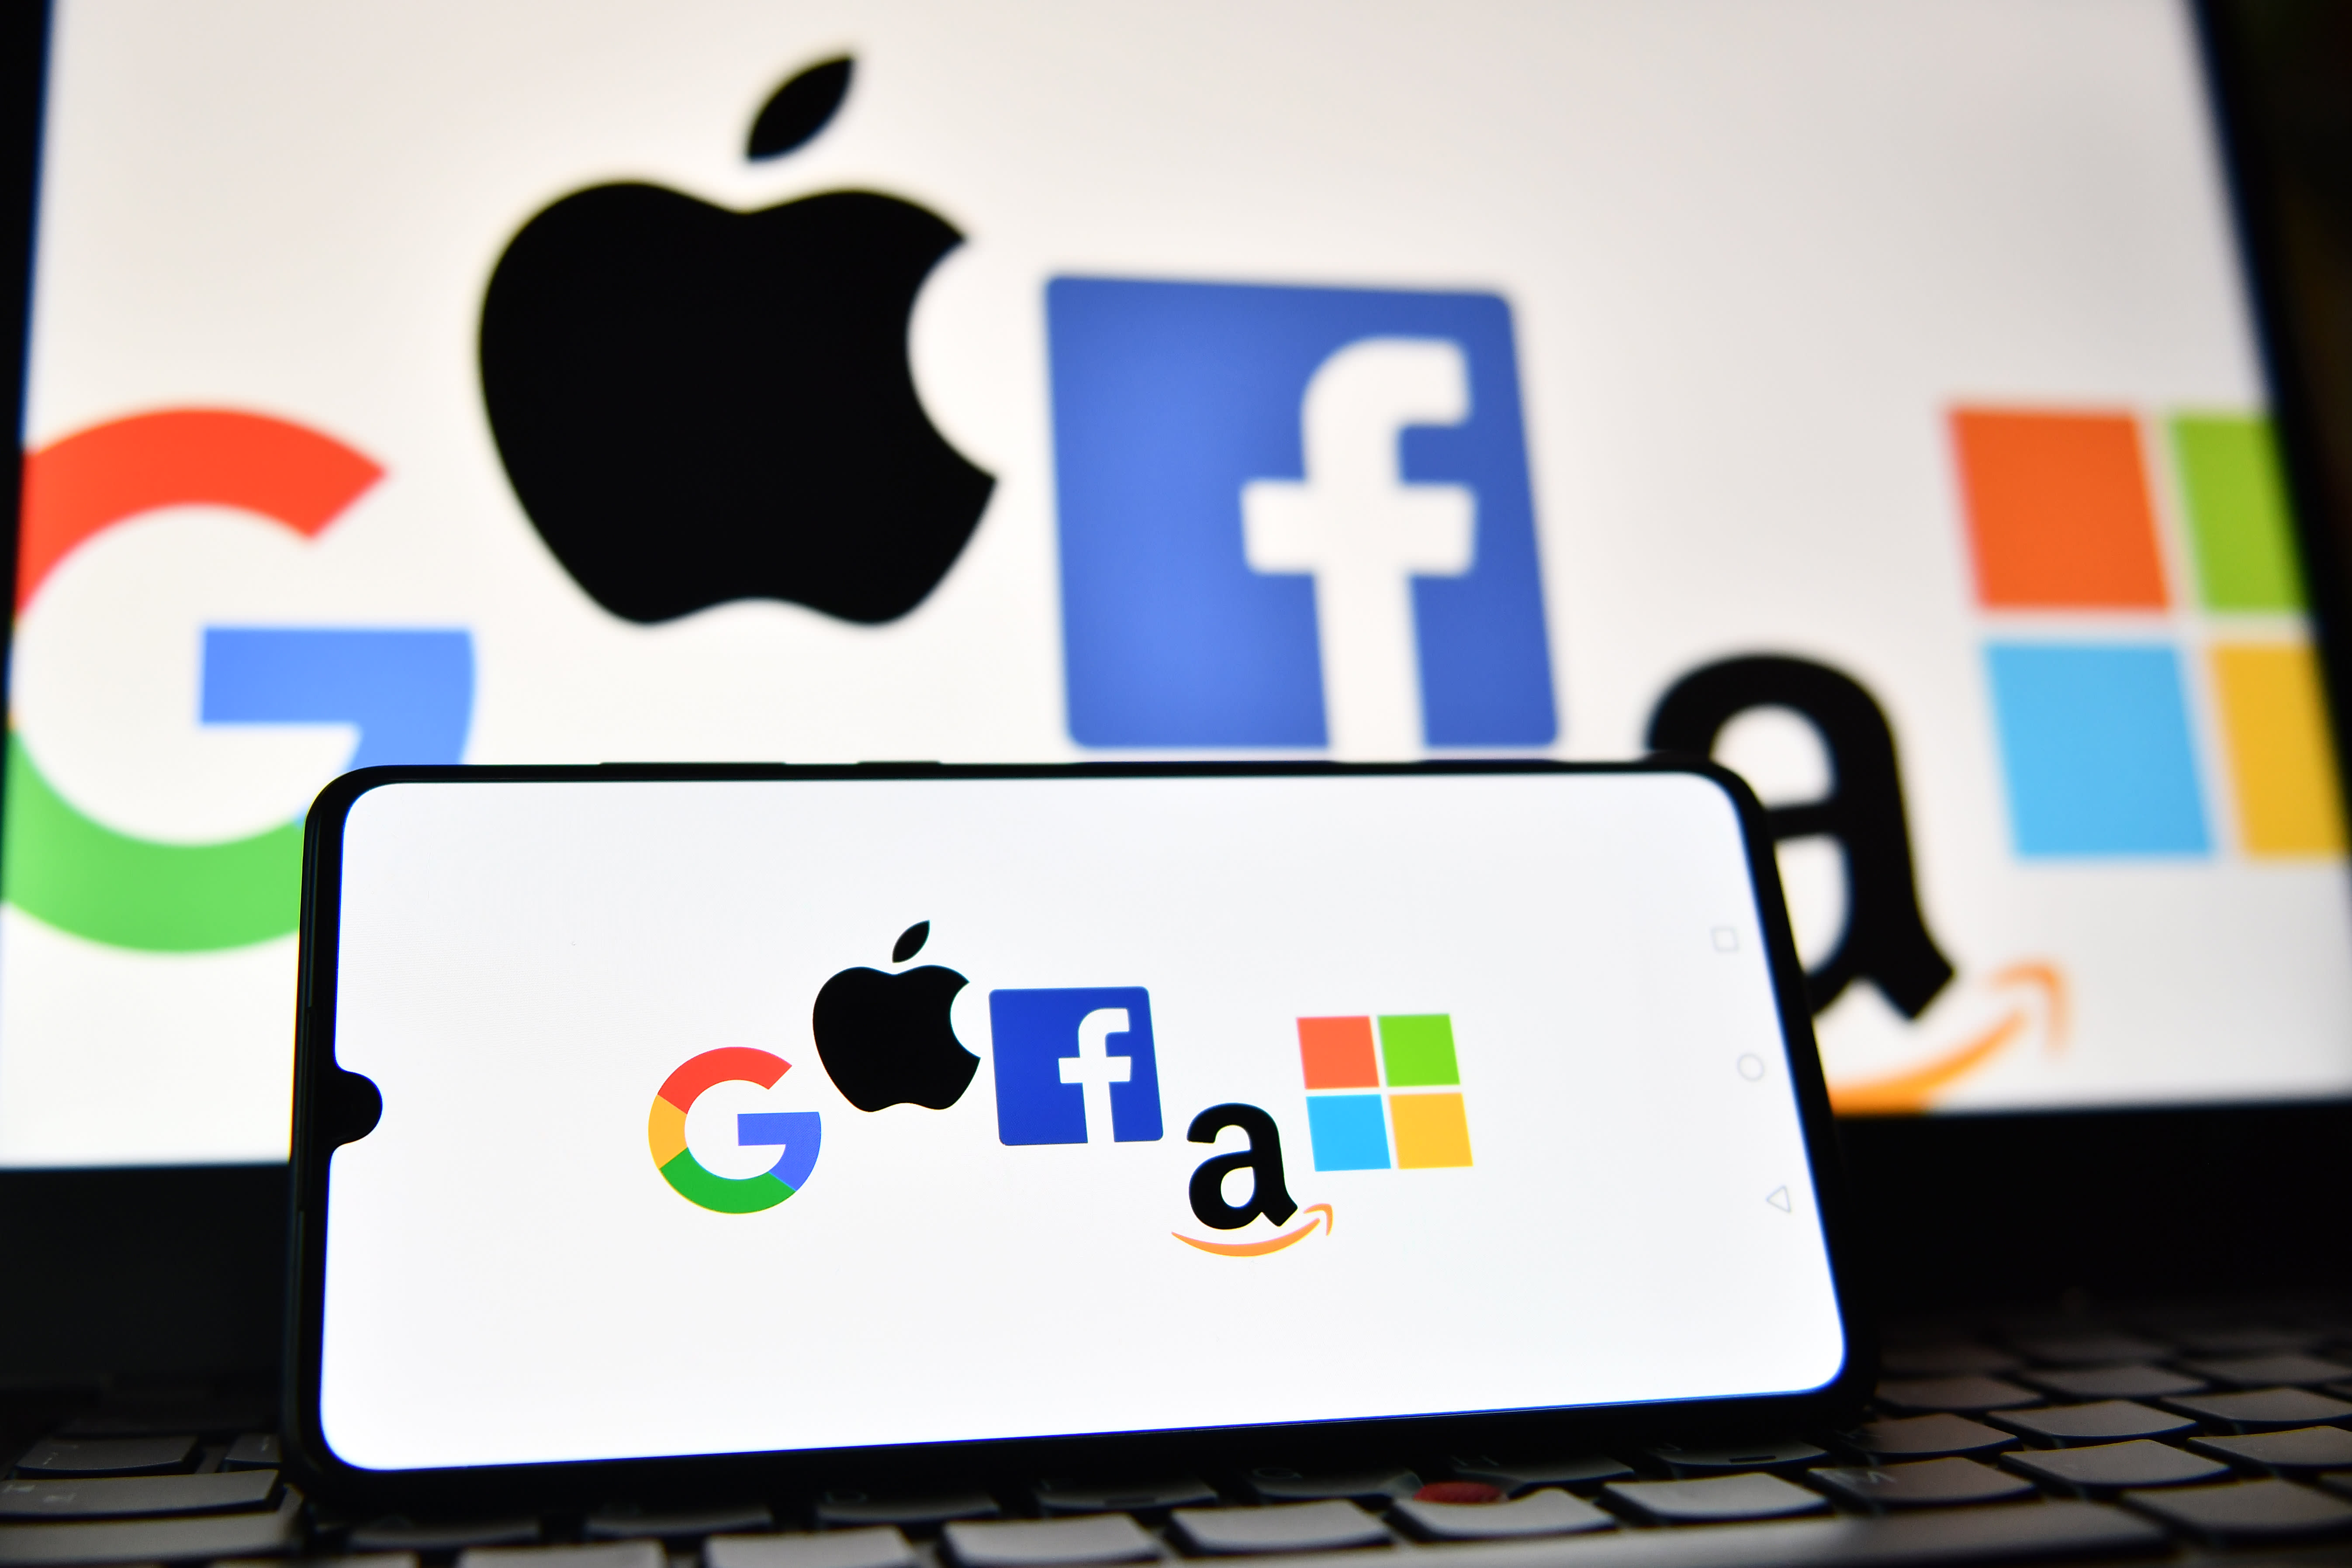 Here’s what we expect from our Big Tech companies when they report earnings this week